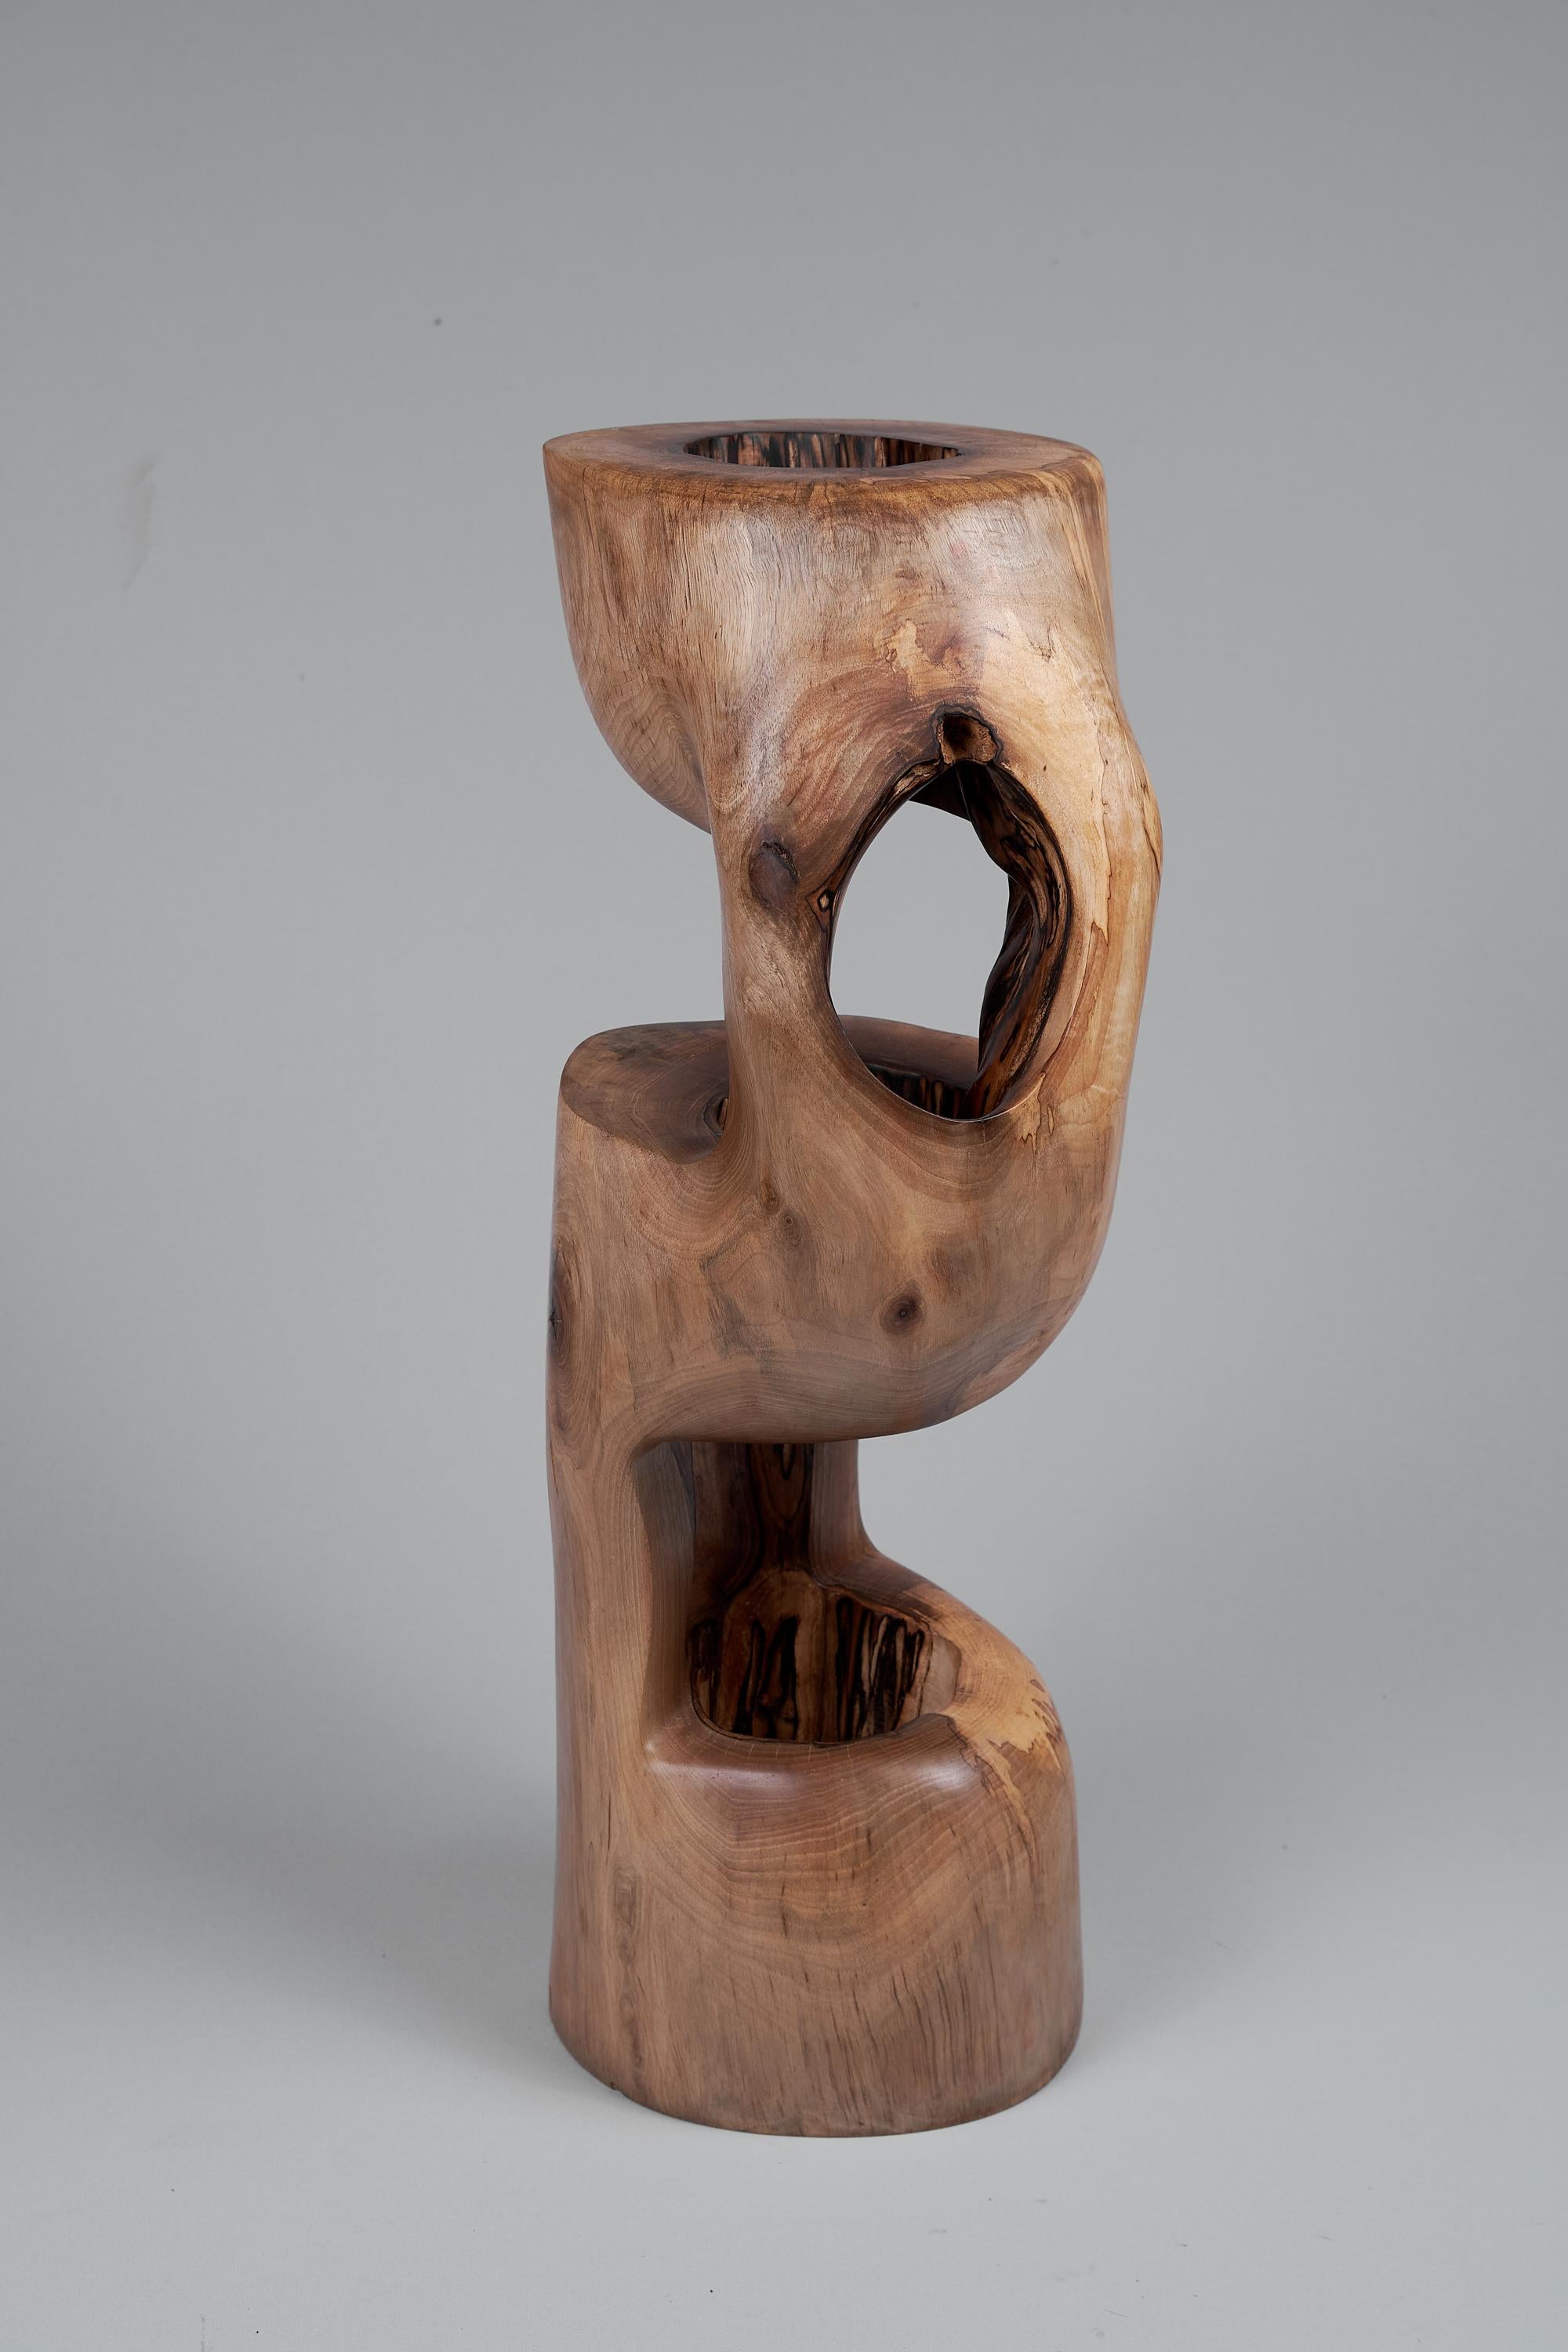 Unique chainsaw carved wooden functional sculpture usable as a multifunctional piece such as a stool, side table, pedestal, night table or many more. Carved from a single piece of wood and protected with the highest quality oils, ensuring durability